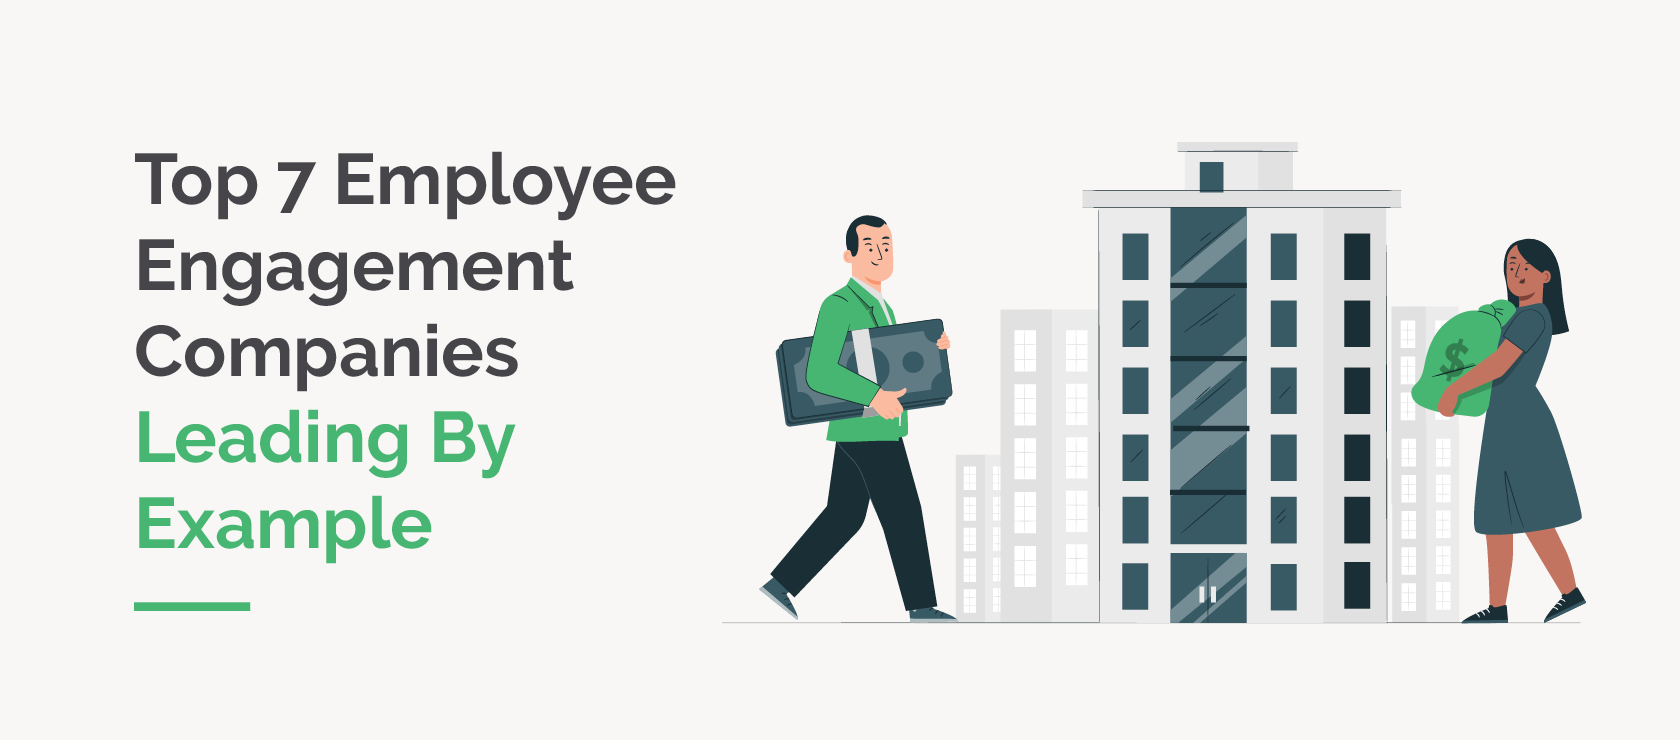 This guide will cover the top employee engagement companies and what they’re doing well that your company can emulate.